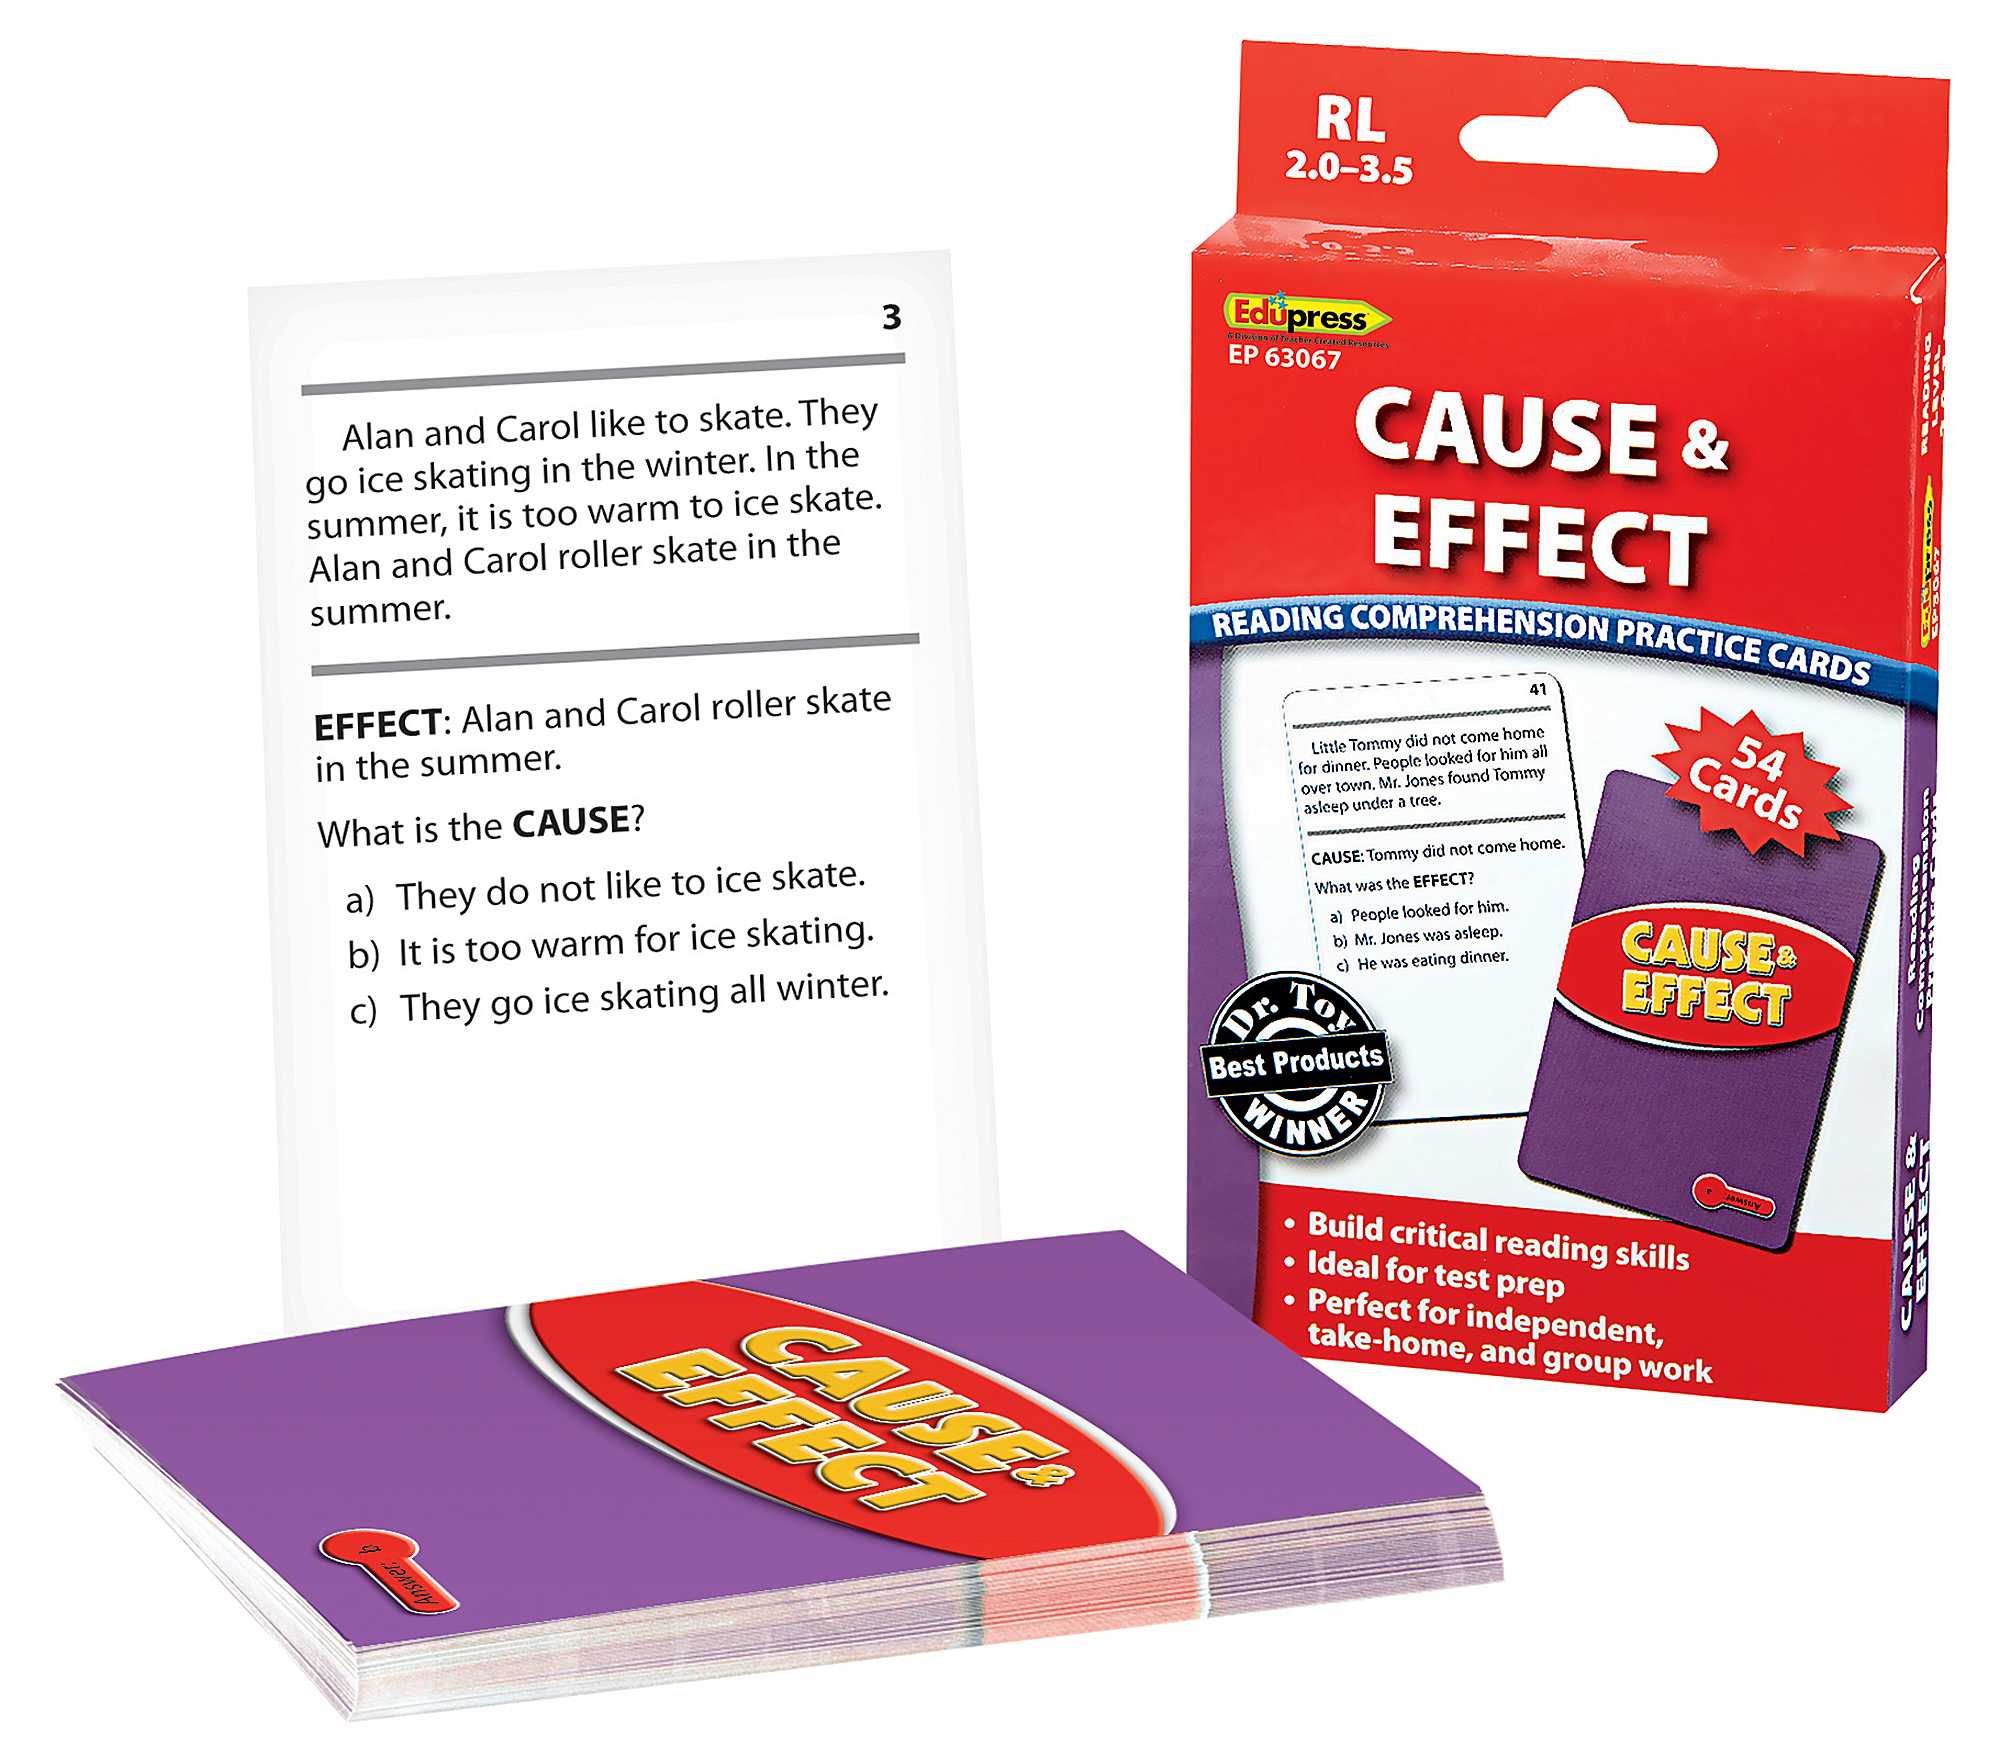 Reading Comprehension Practice Cards: Cause & Effect (Red Level)